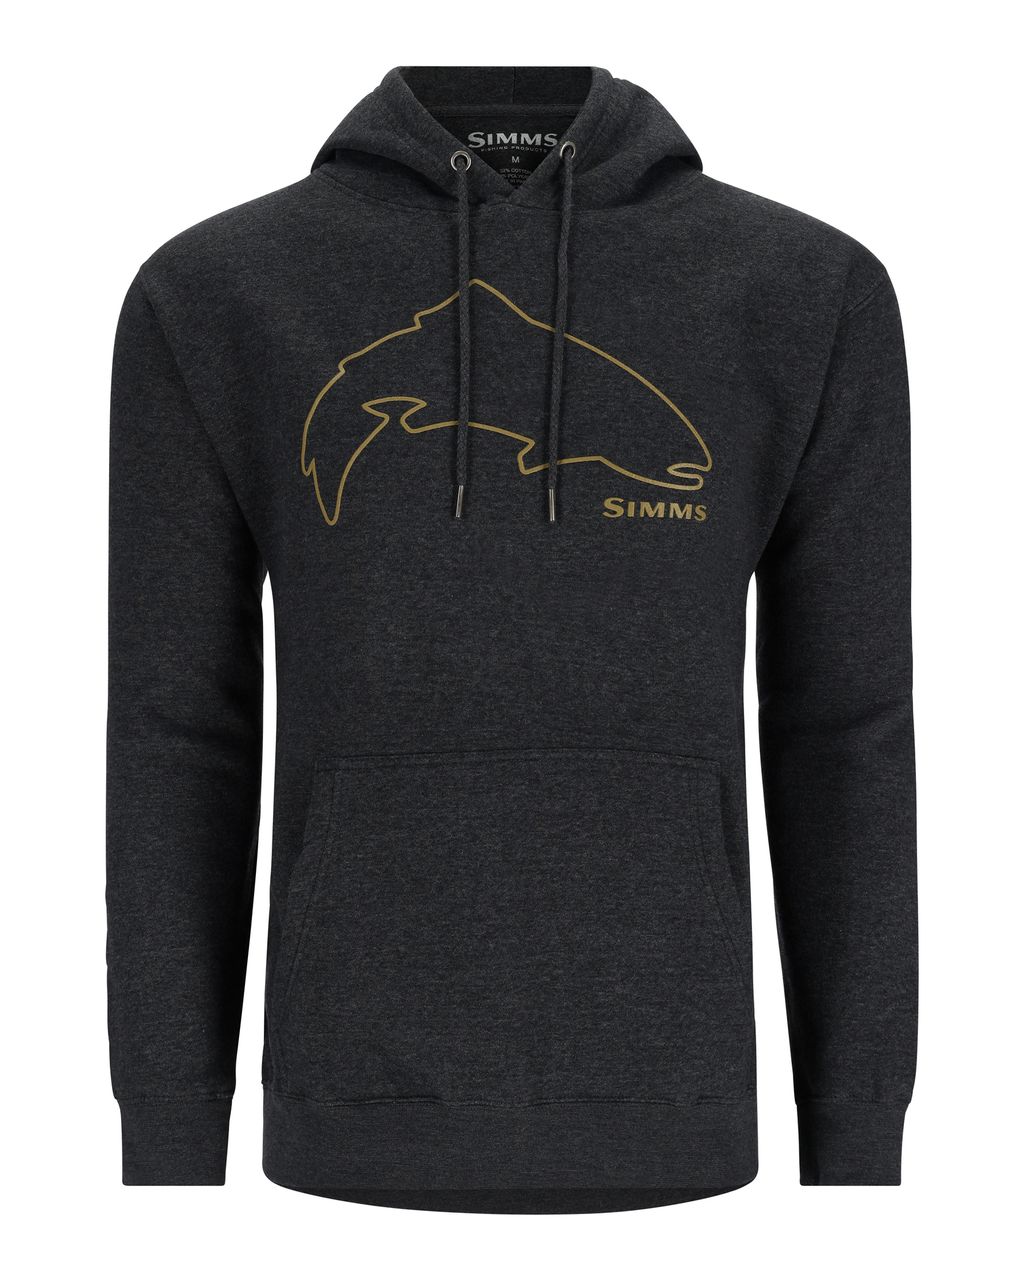 Se Simms Trout Outline Hoody Charcoal Heather Xlarge hos Outdoor i Centrum